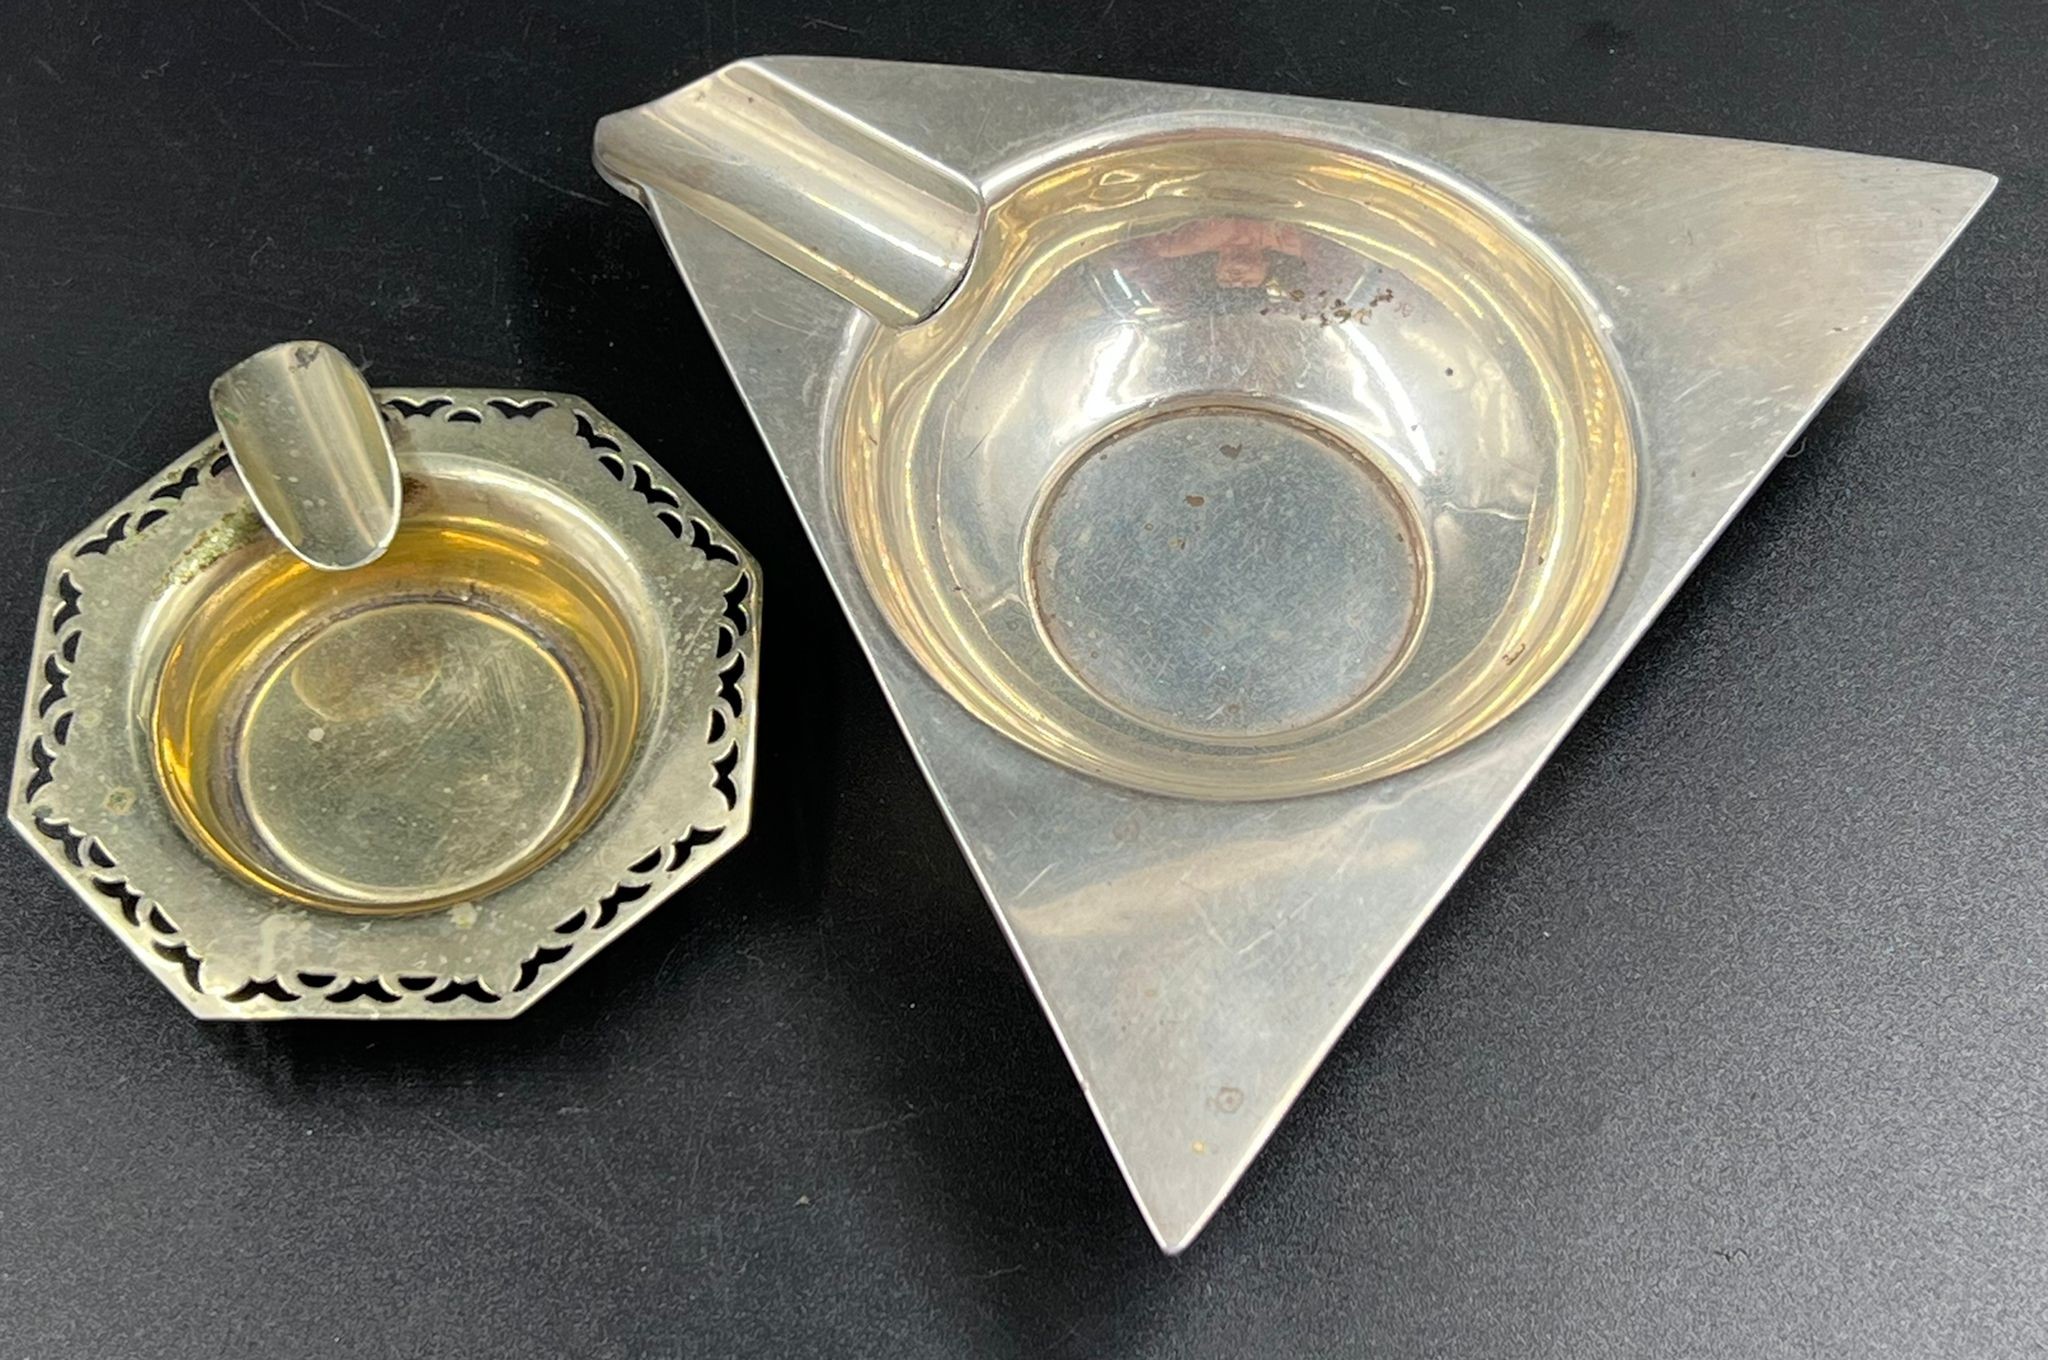 An Antique Solid Silver Ashtray - with a smaller silver plated one. Hallmarks for Birmingham 1922 by